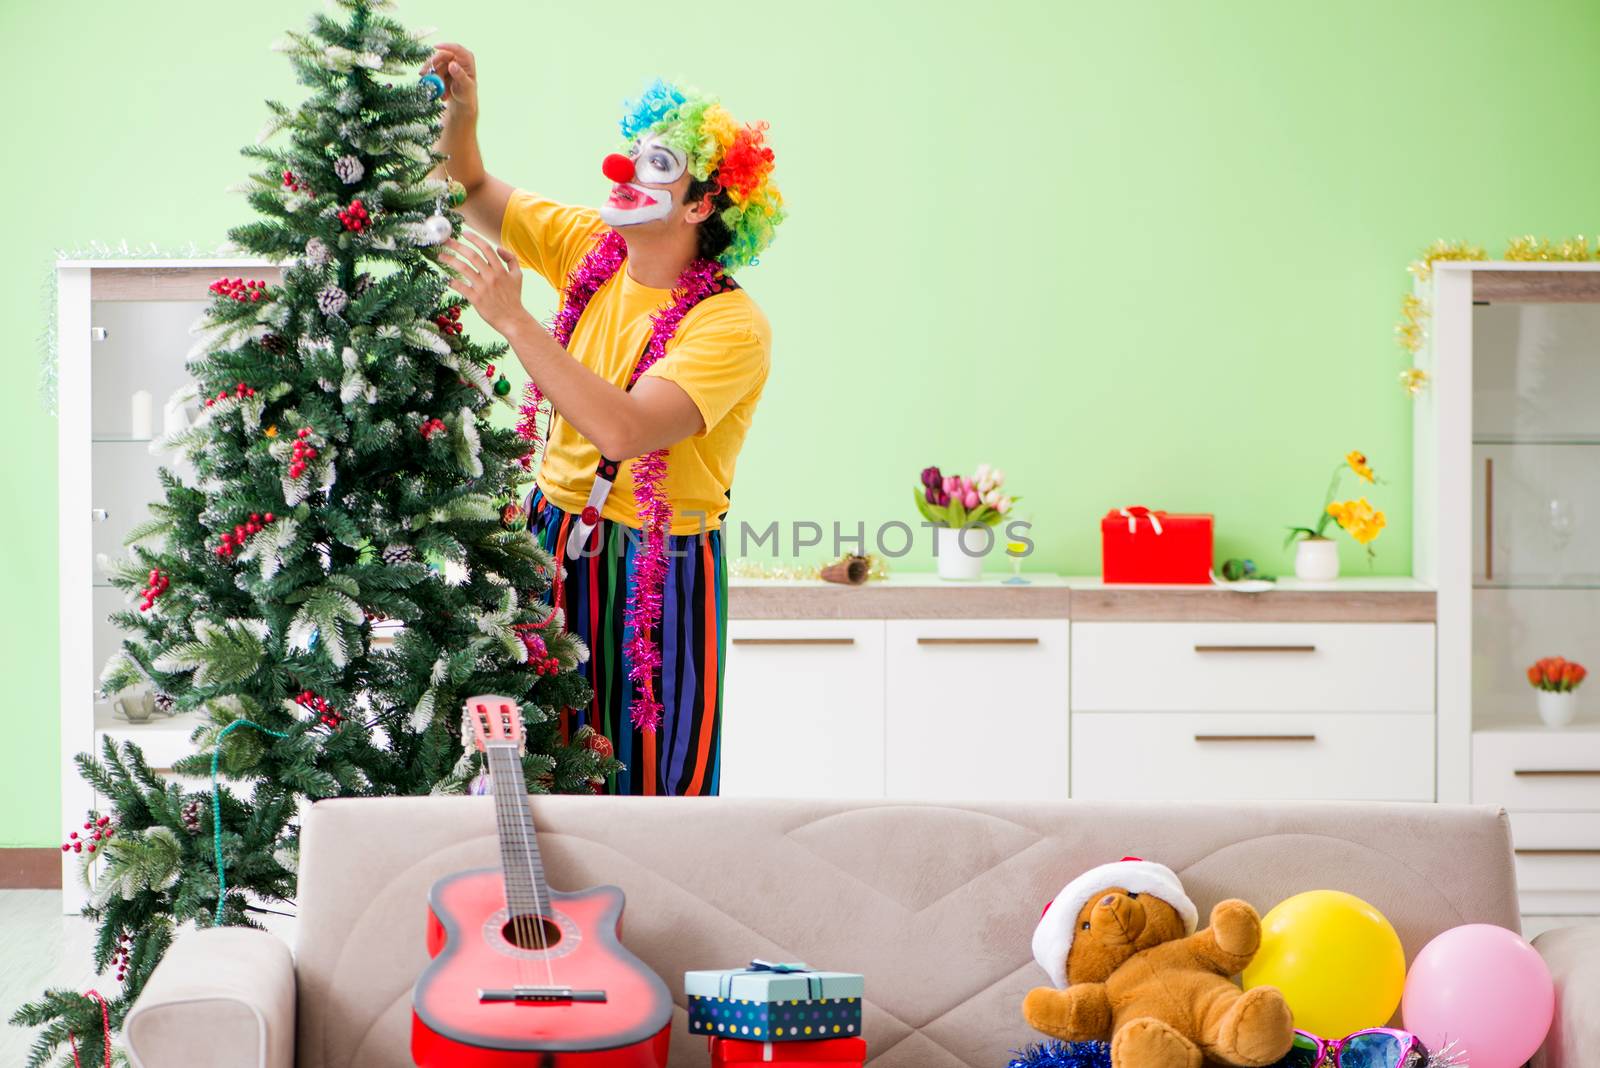 Funny clown in Christmas celebration concept  by Elnur